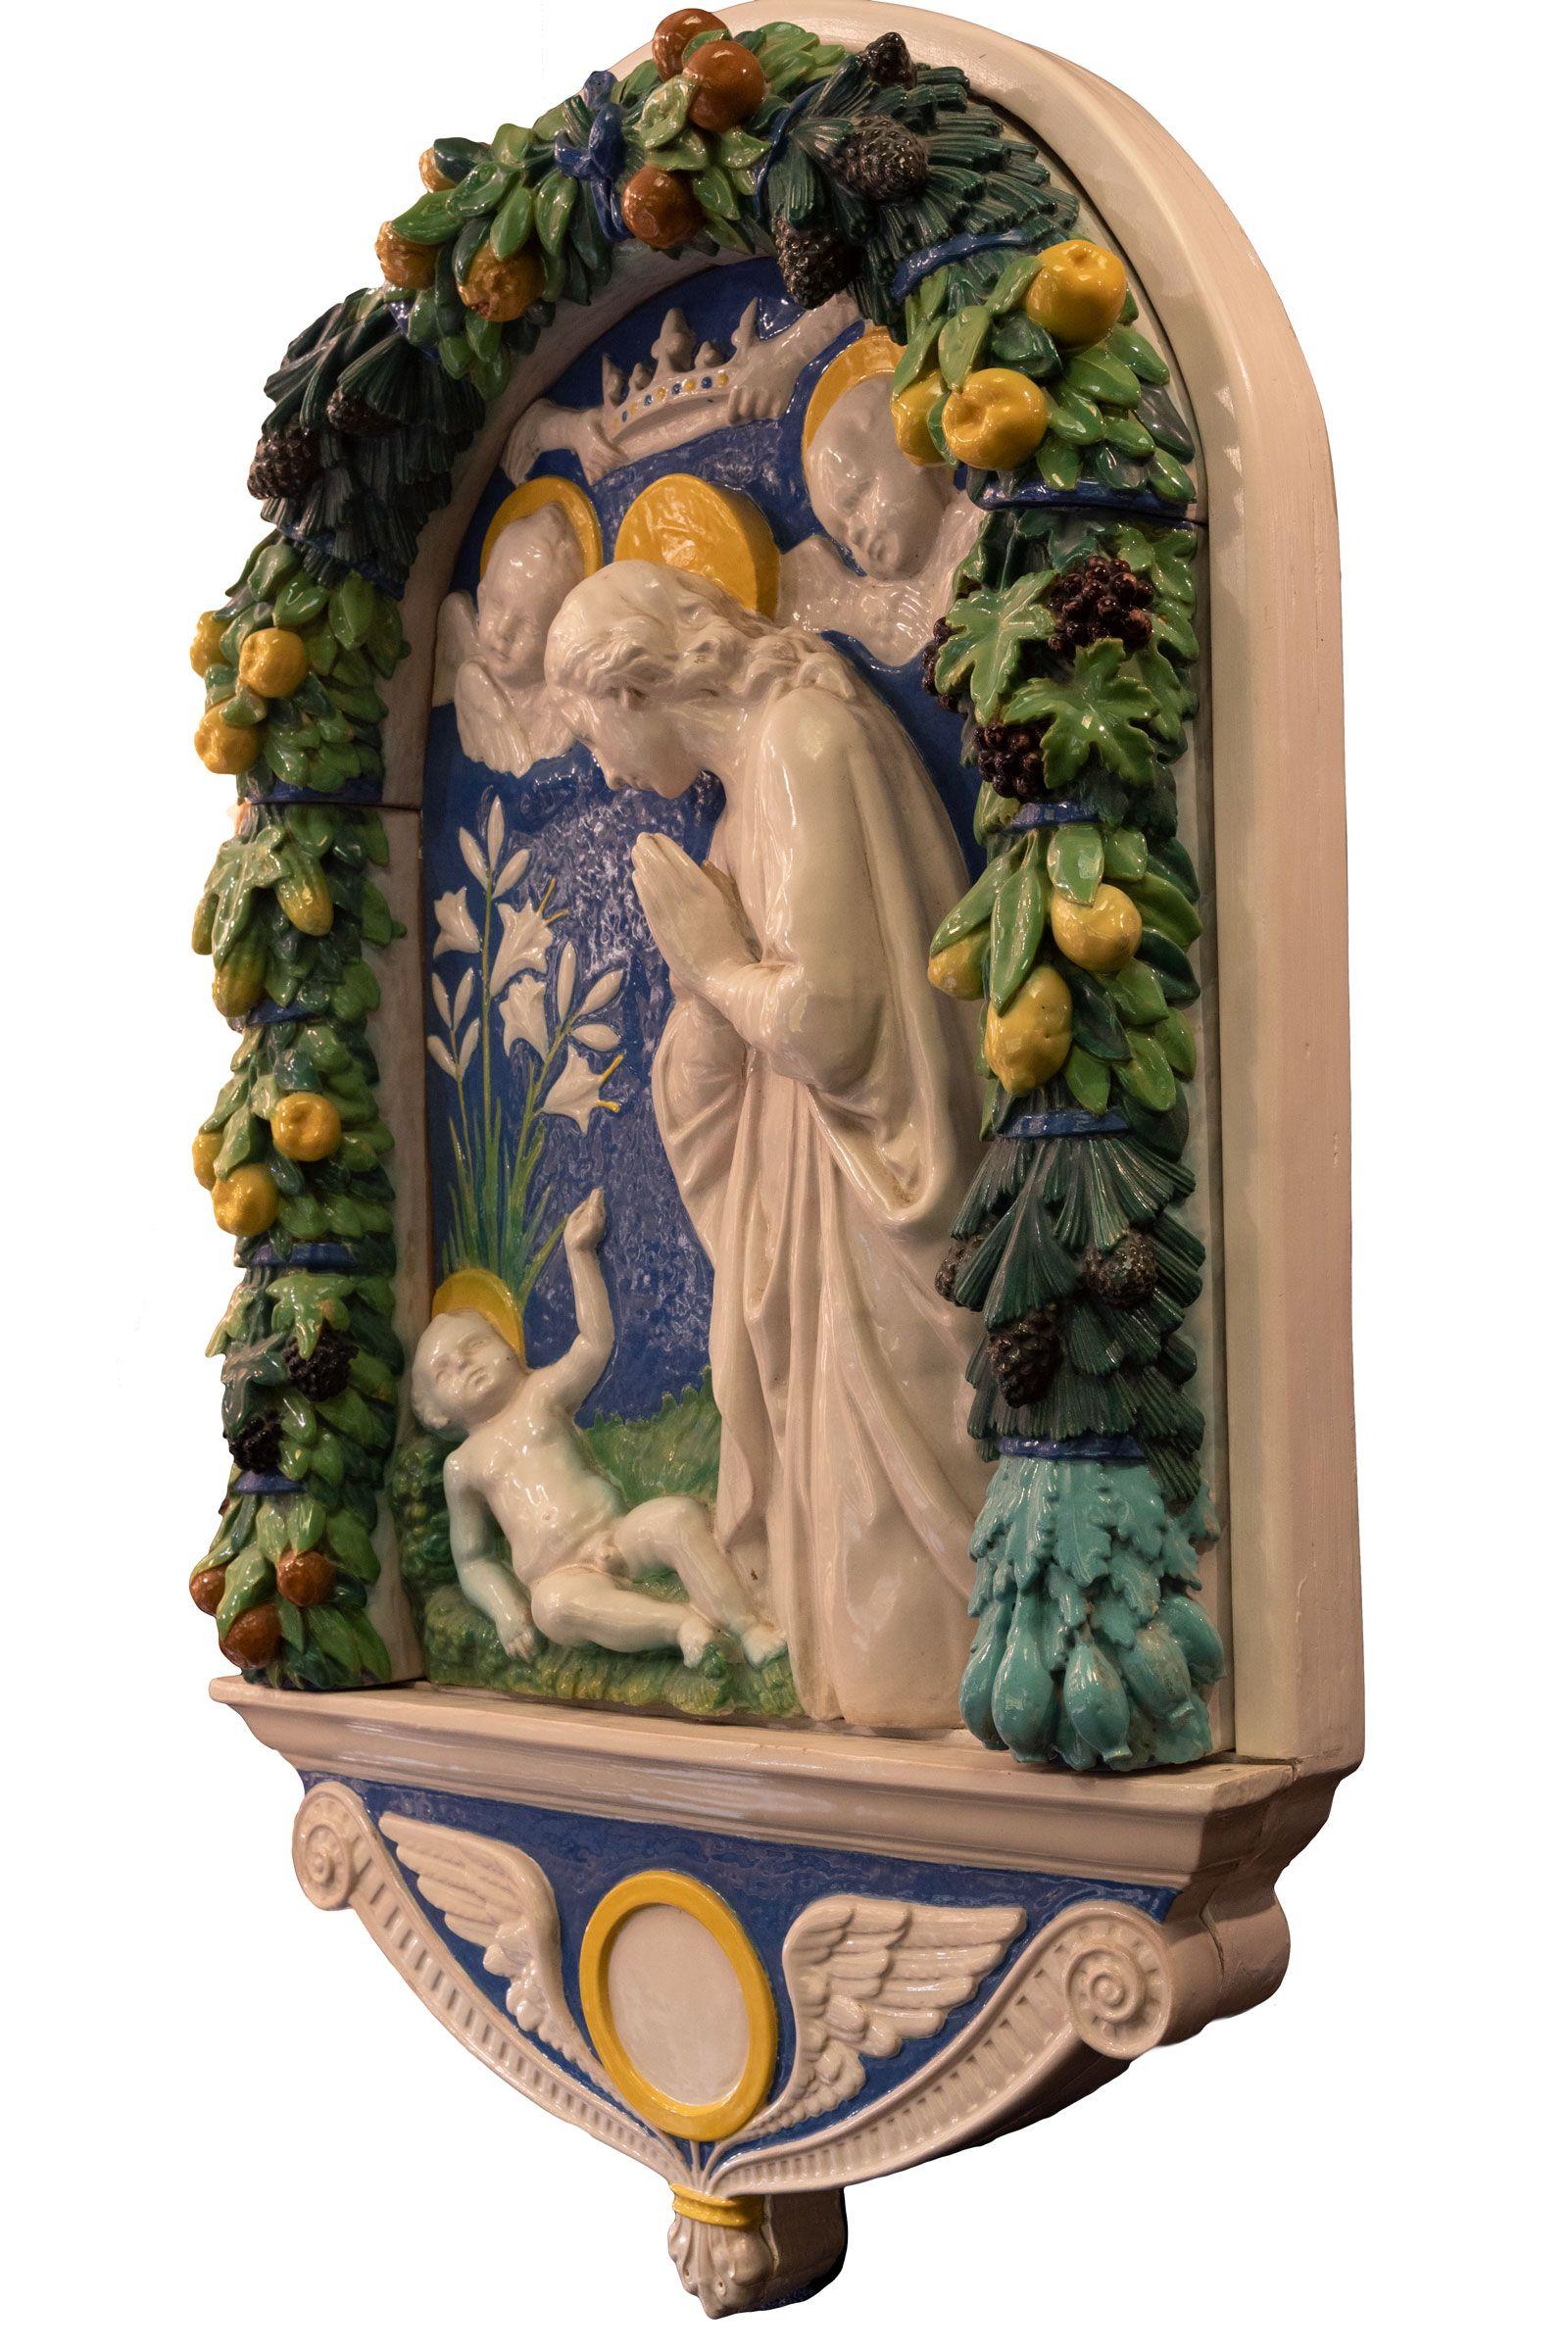 After Andrea della Robbia (Florentin, 1435-1525) Adoration of the Christ Child (circa 1890) A large terracotta sculpture of Mary and the Christ Child with a heavy wreath of woven fruit and leaves, made during the last quarter of the 19nth century.